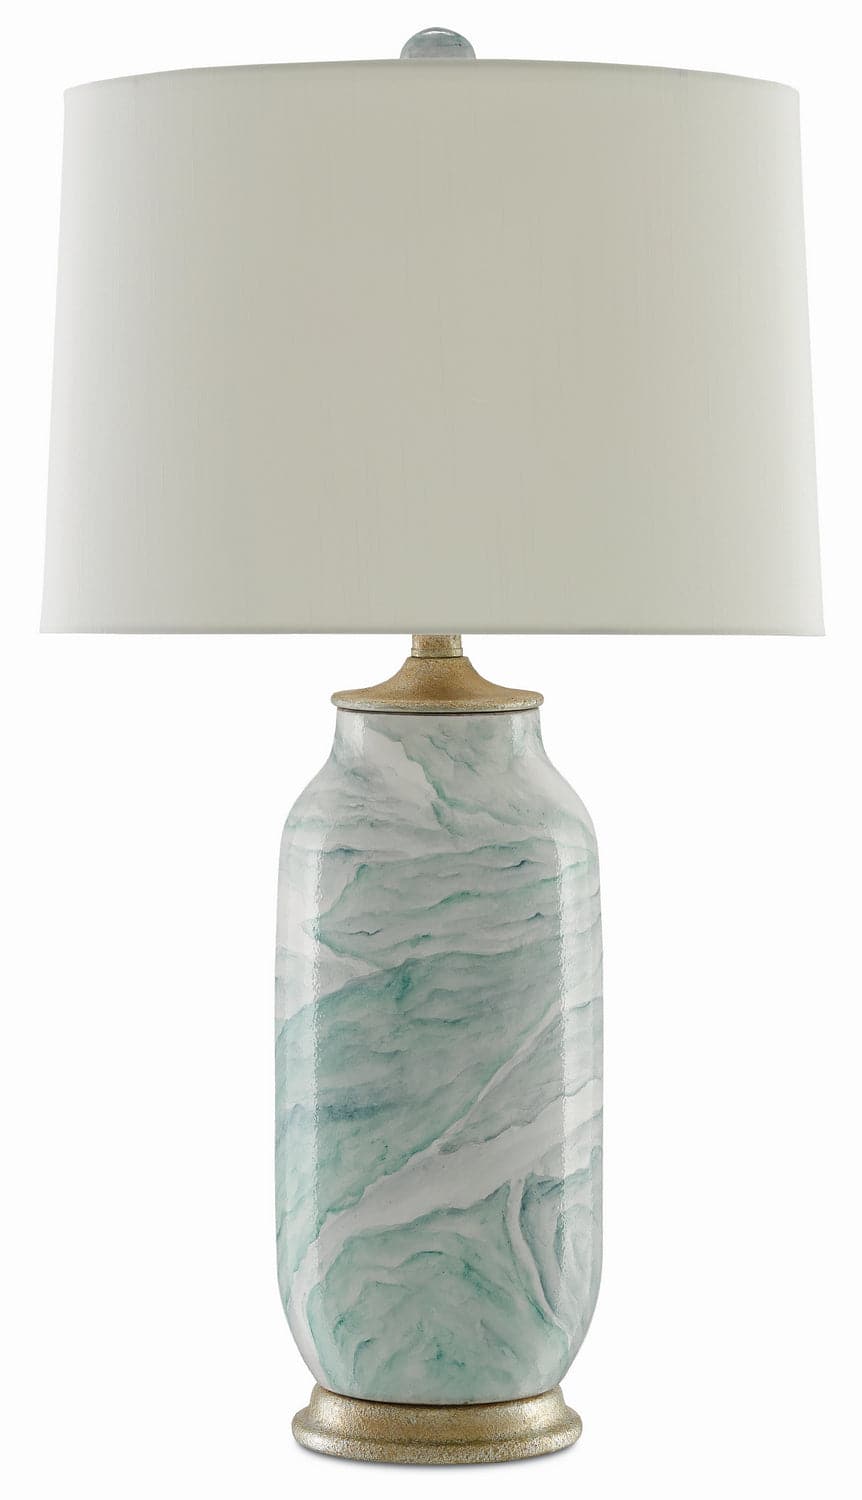 One Light Table Lamp from the Sarcelle collection in Sea Foam/Harlow Silver Leaf finish